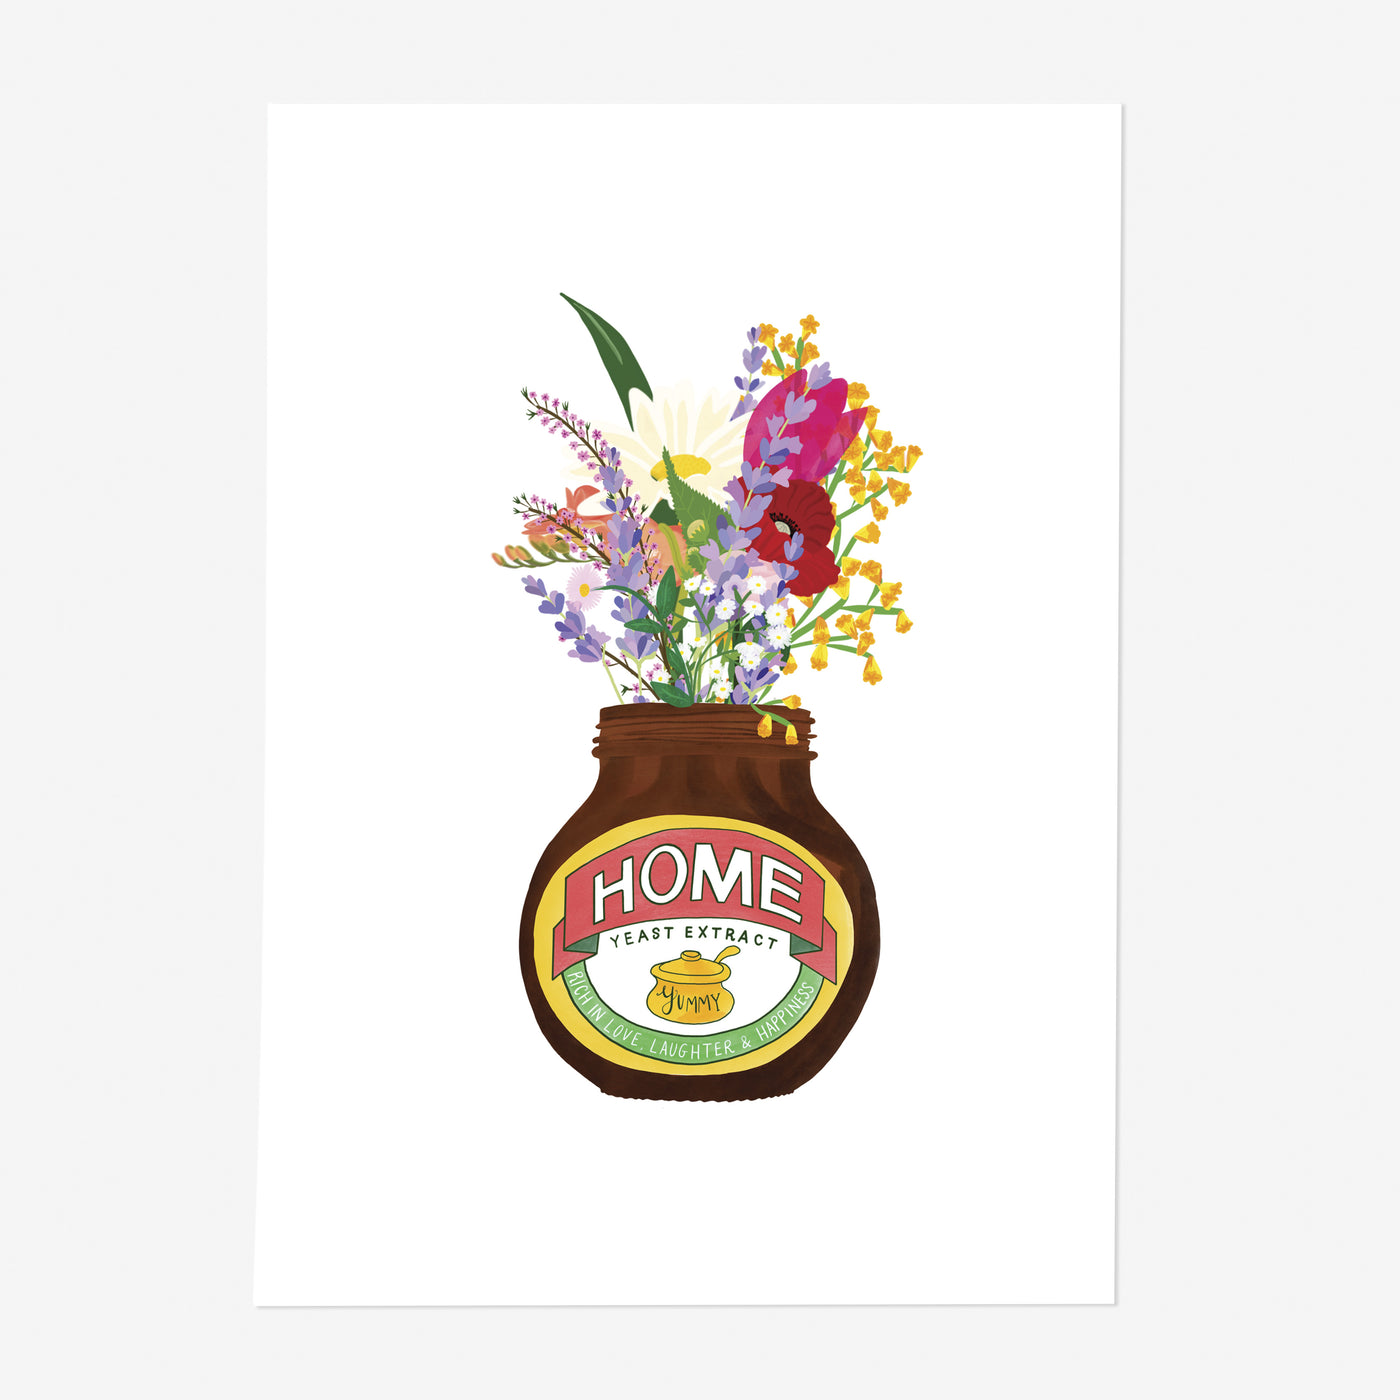 Home Yeast Extract Jar & Flowers Art Print - Poppins & Co.